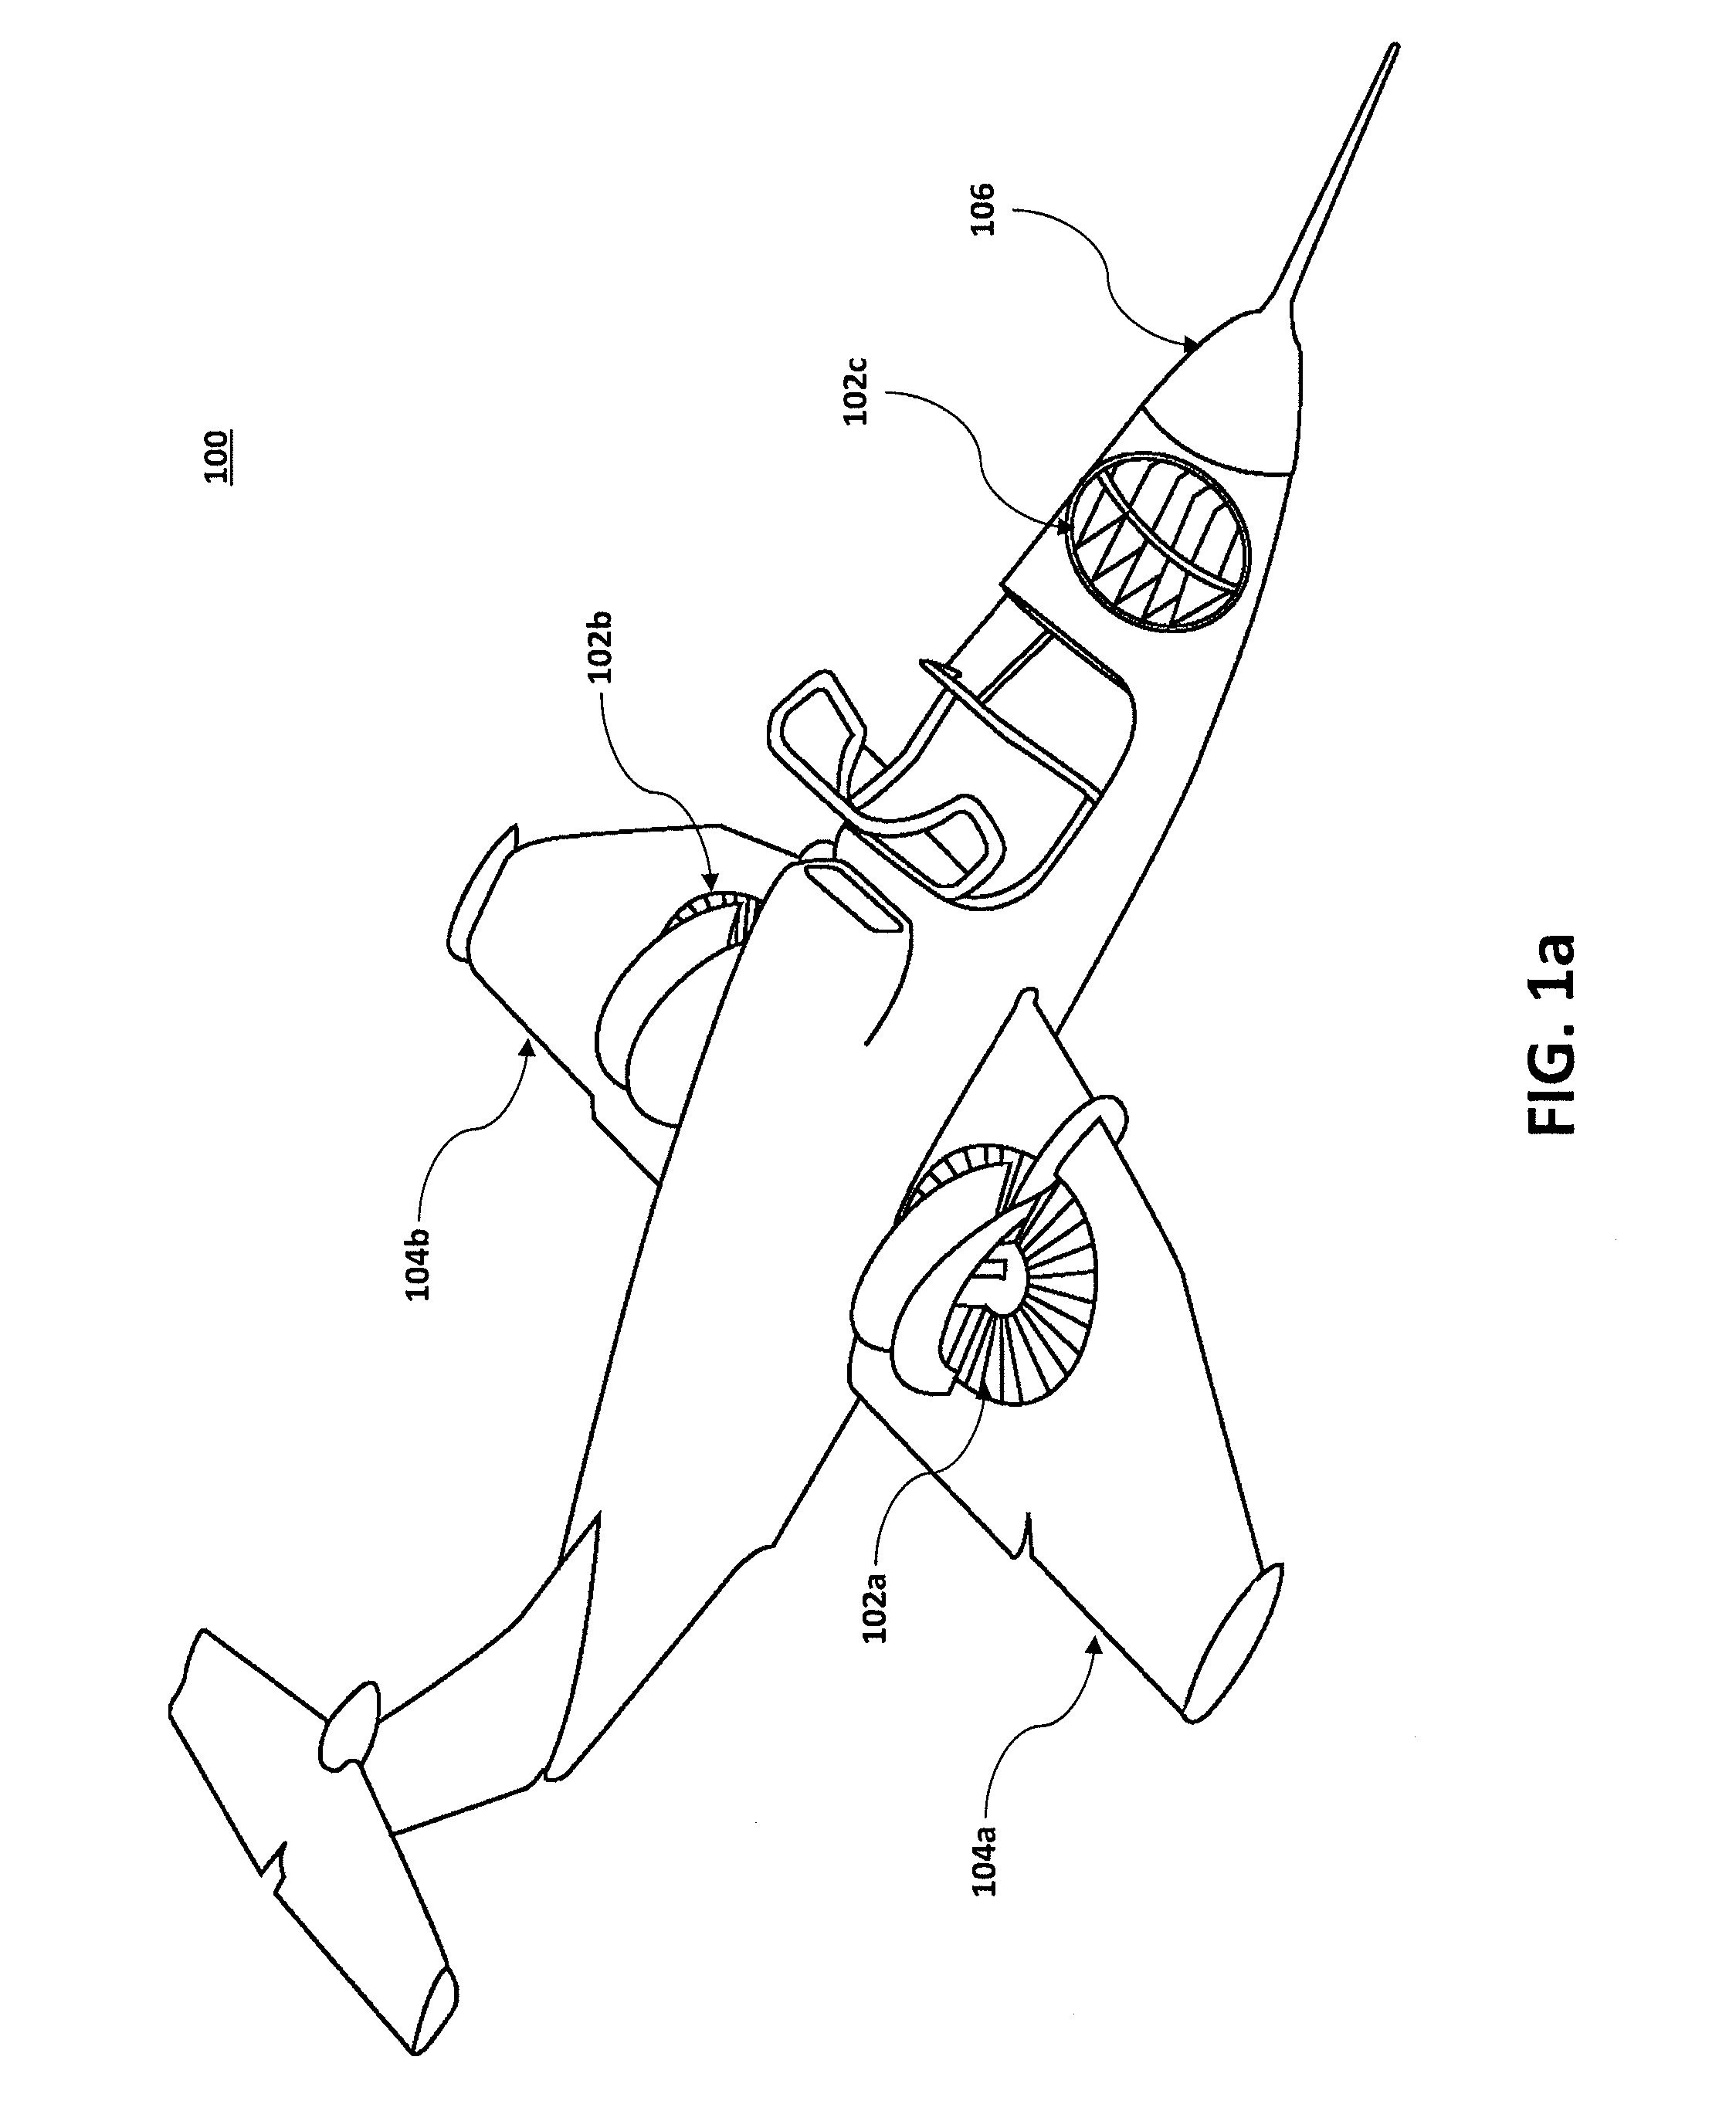 System and method for improving transition lift-fan performance